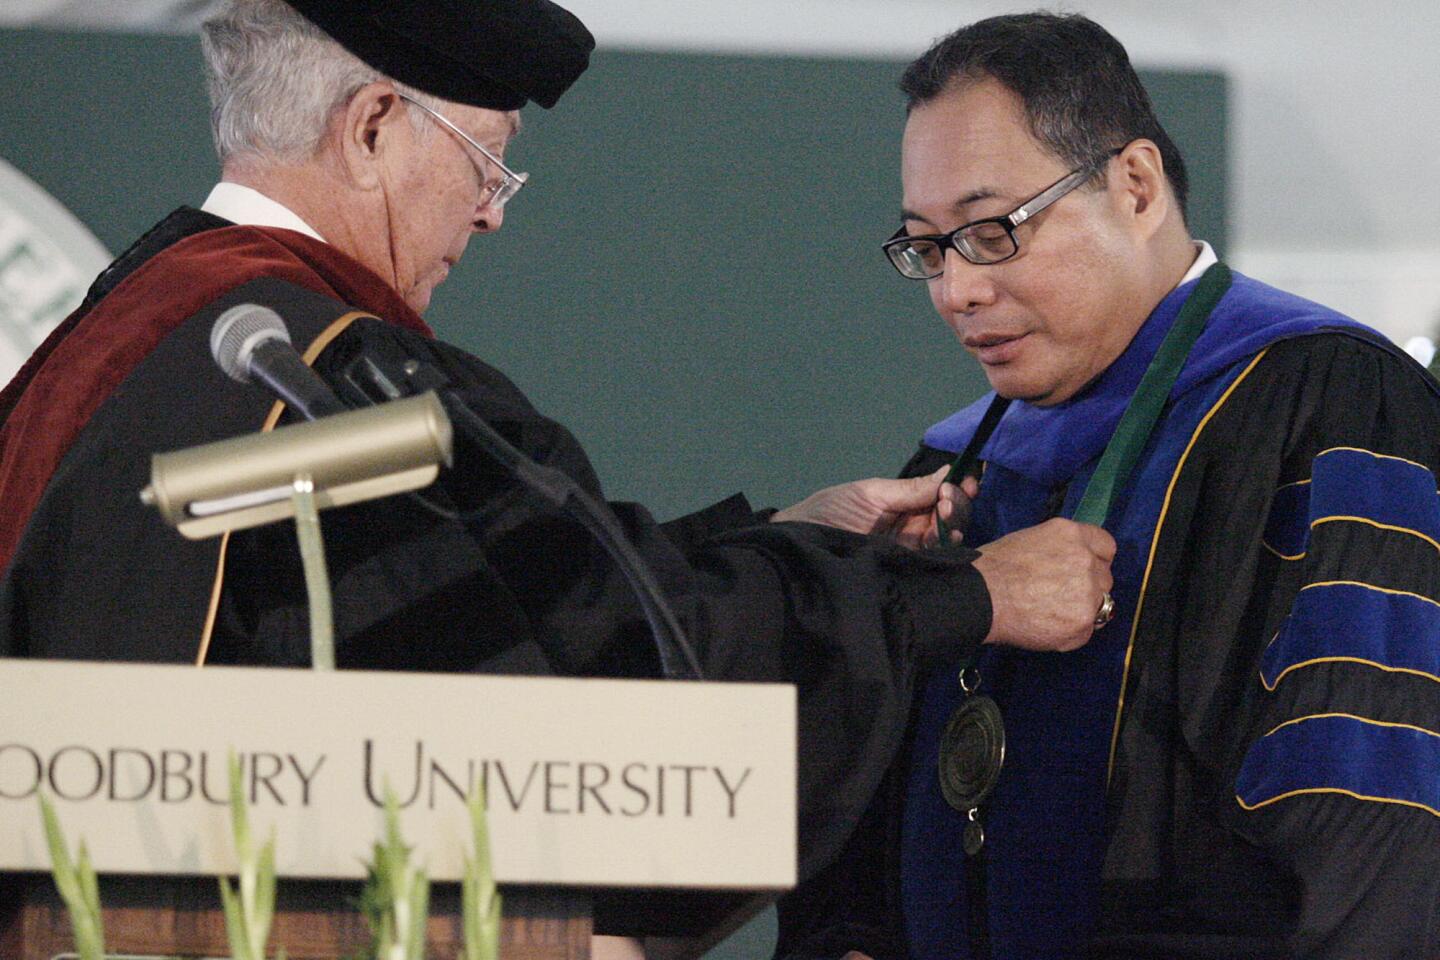 Chairman Board of Trustees Robert W. Kummer, Jr., left, puts on a medallion on Luis Ma R. Calingo during the inauguration and installation of Woodbury's 13th president, which took place at Woodbury University in Burbank on Saturday, October 20, 2012.